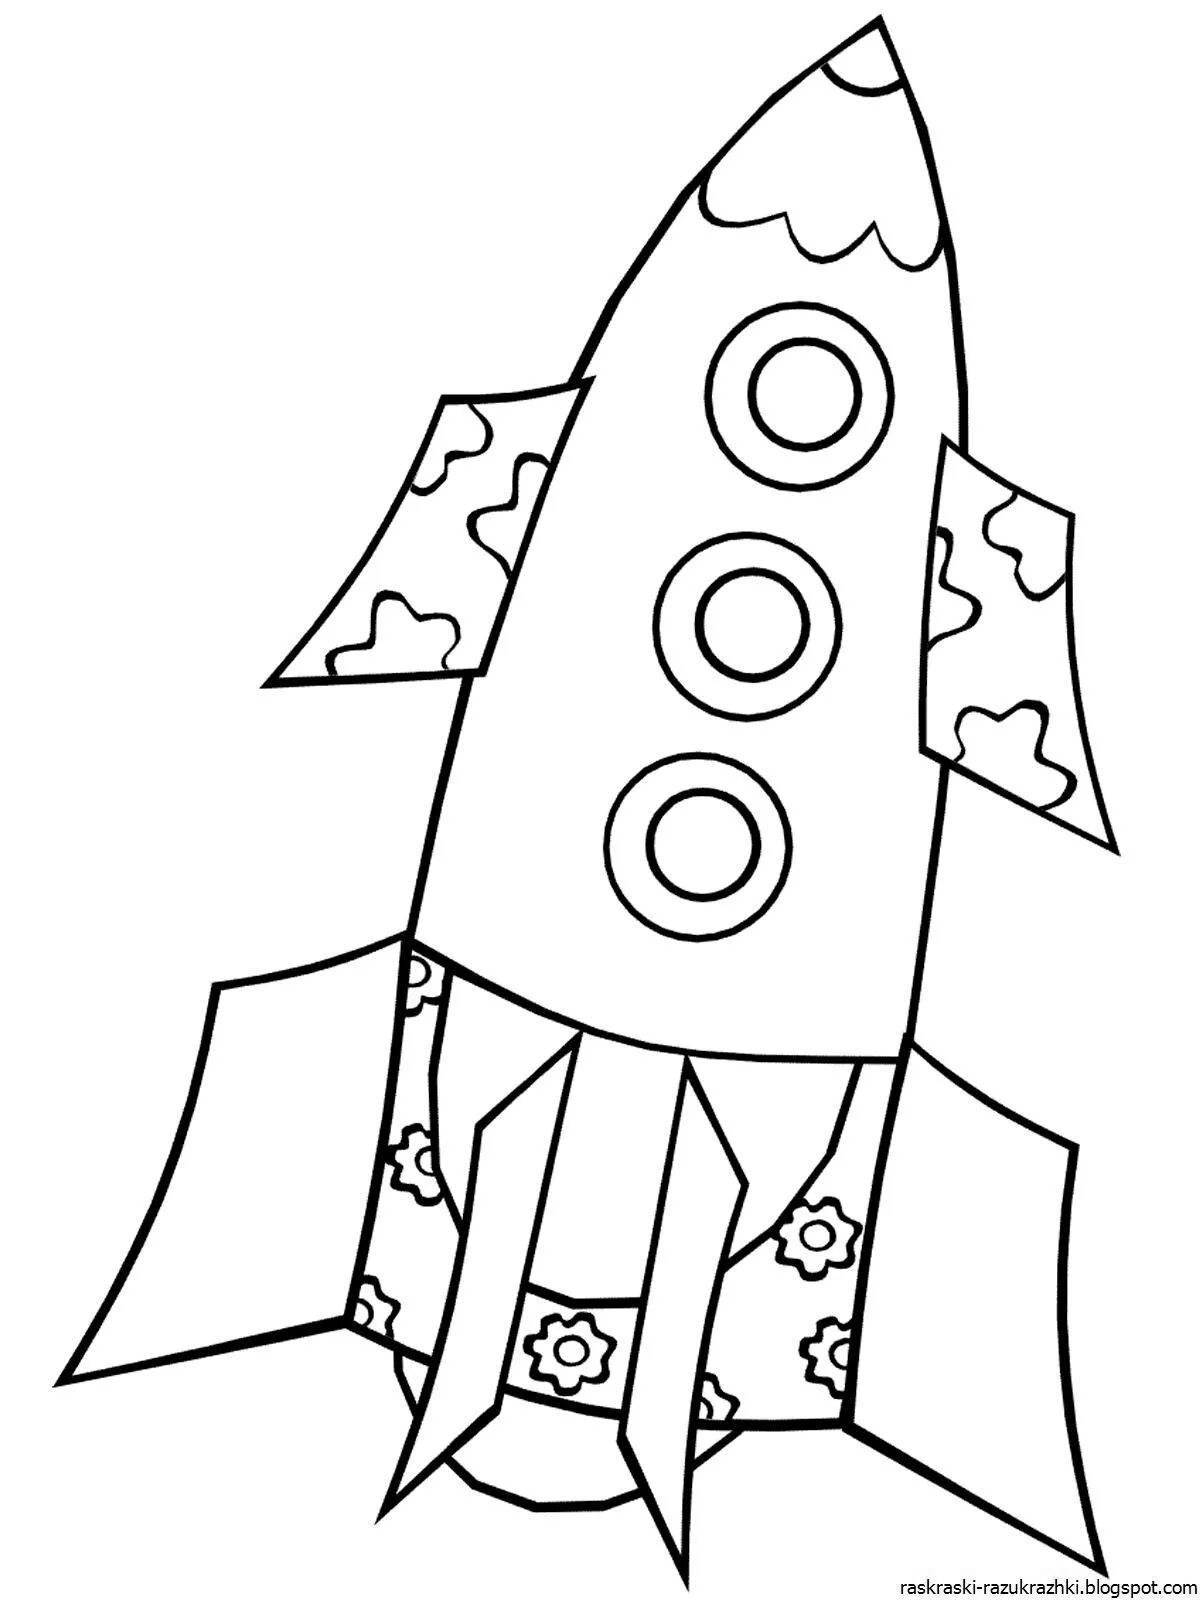 Cute rocket coloring book for 3-4 year olds